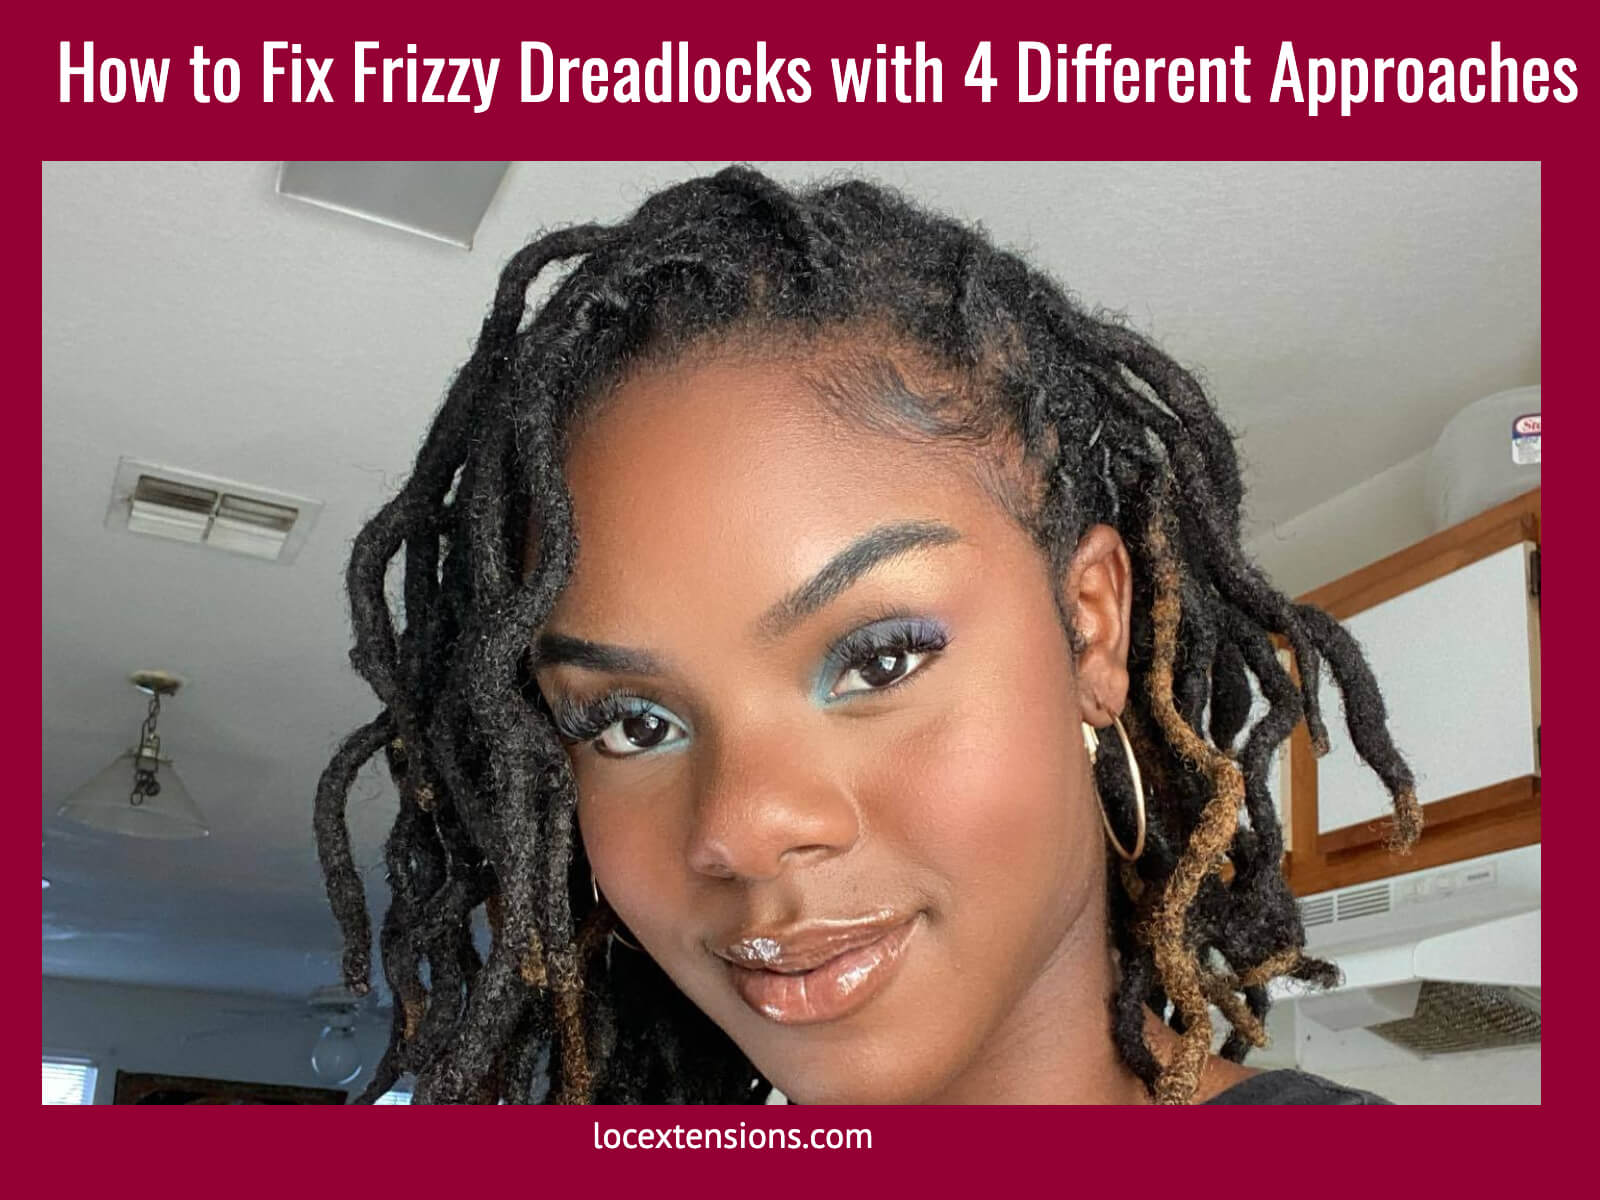 How to Fix Frizzy Dreadlocks with 4 Different Approaches